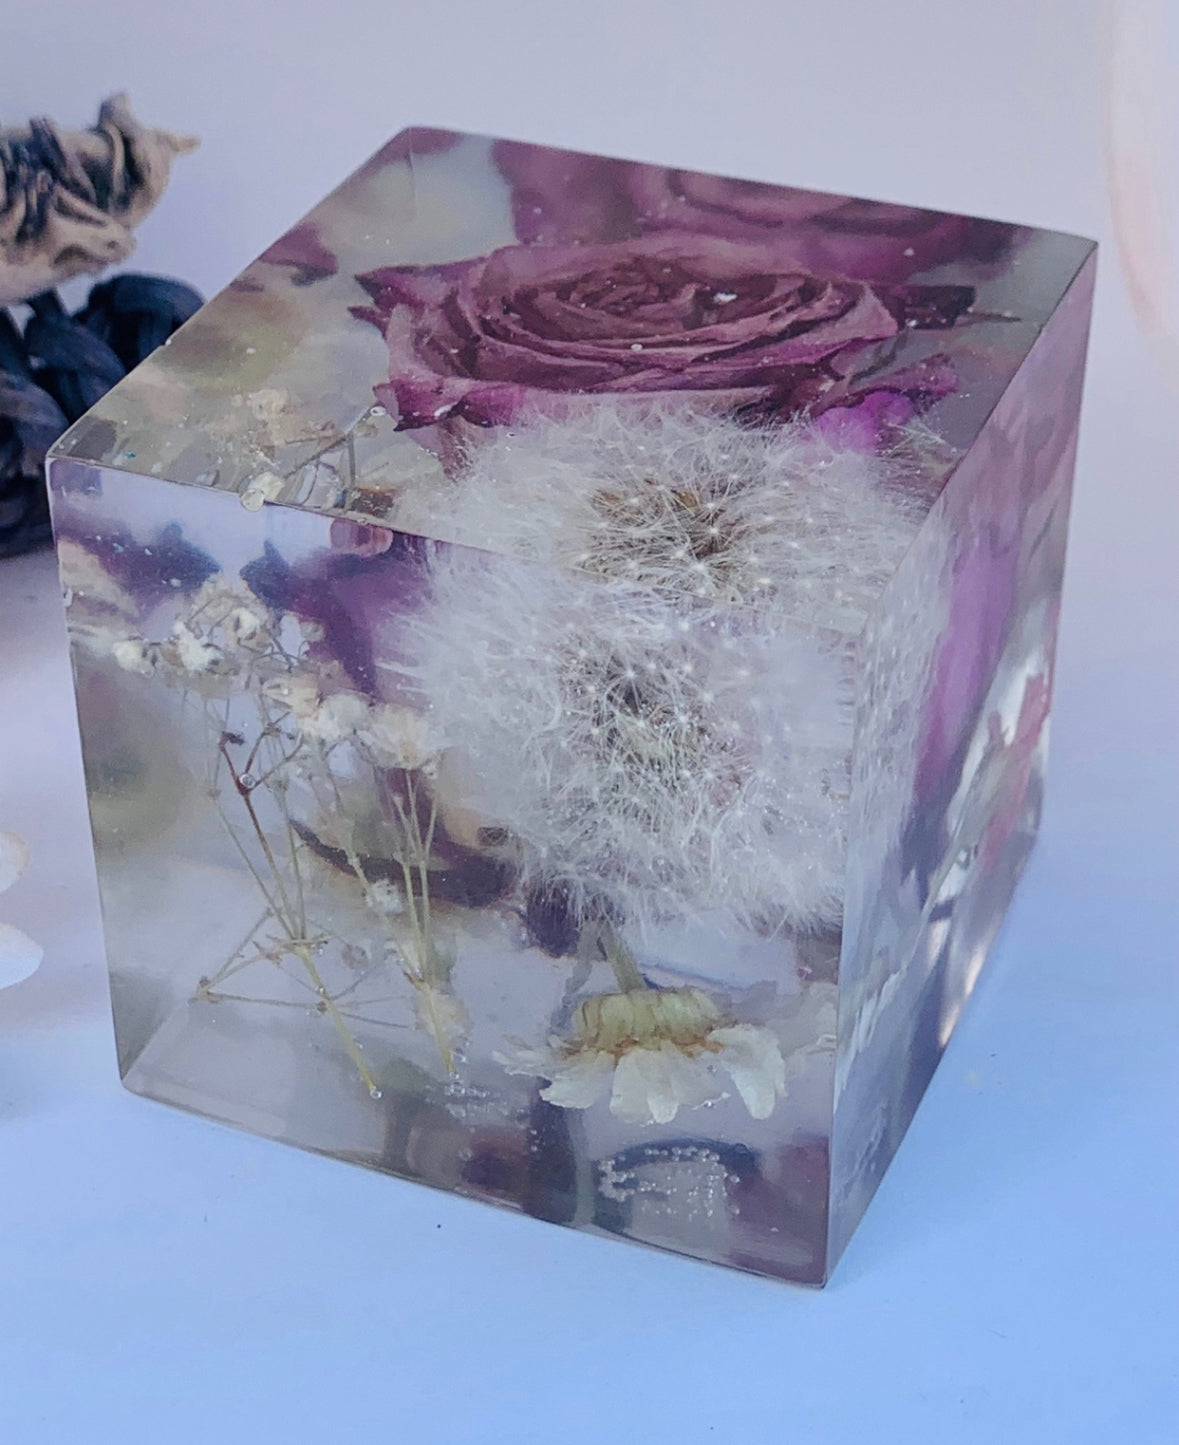 Cube Paperweight